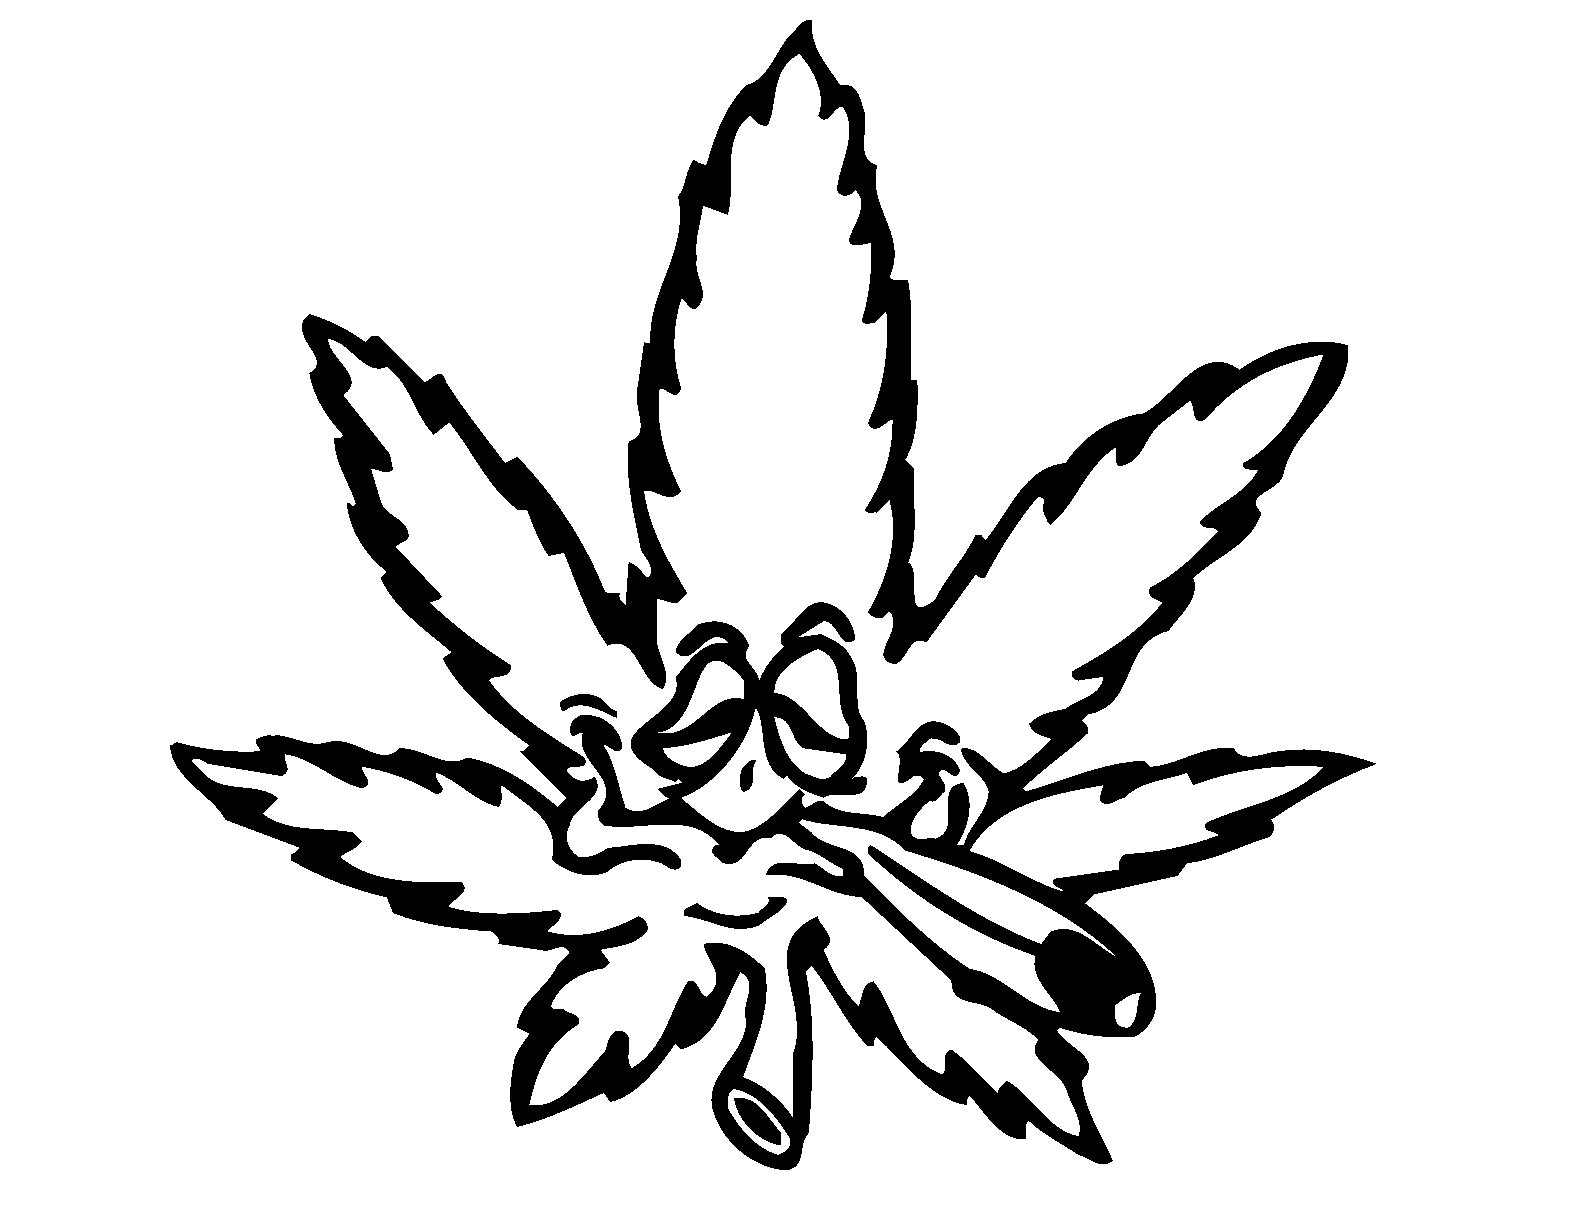 Weed Leaf Clip Art - Cliparts.co